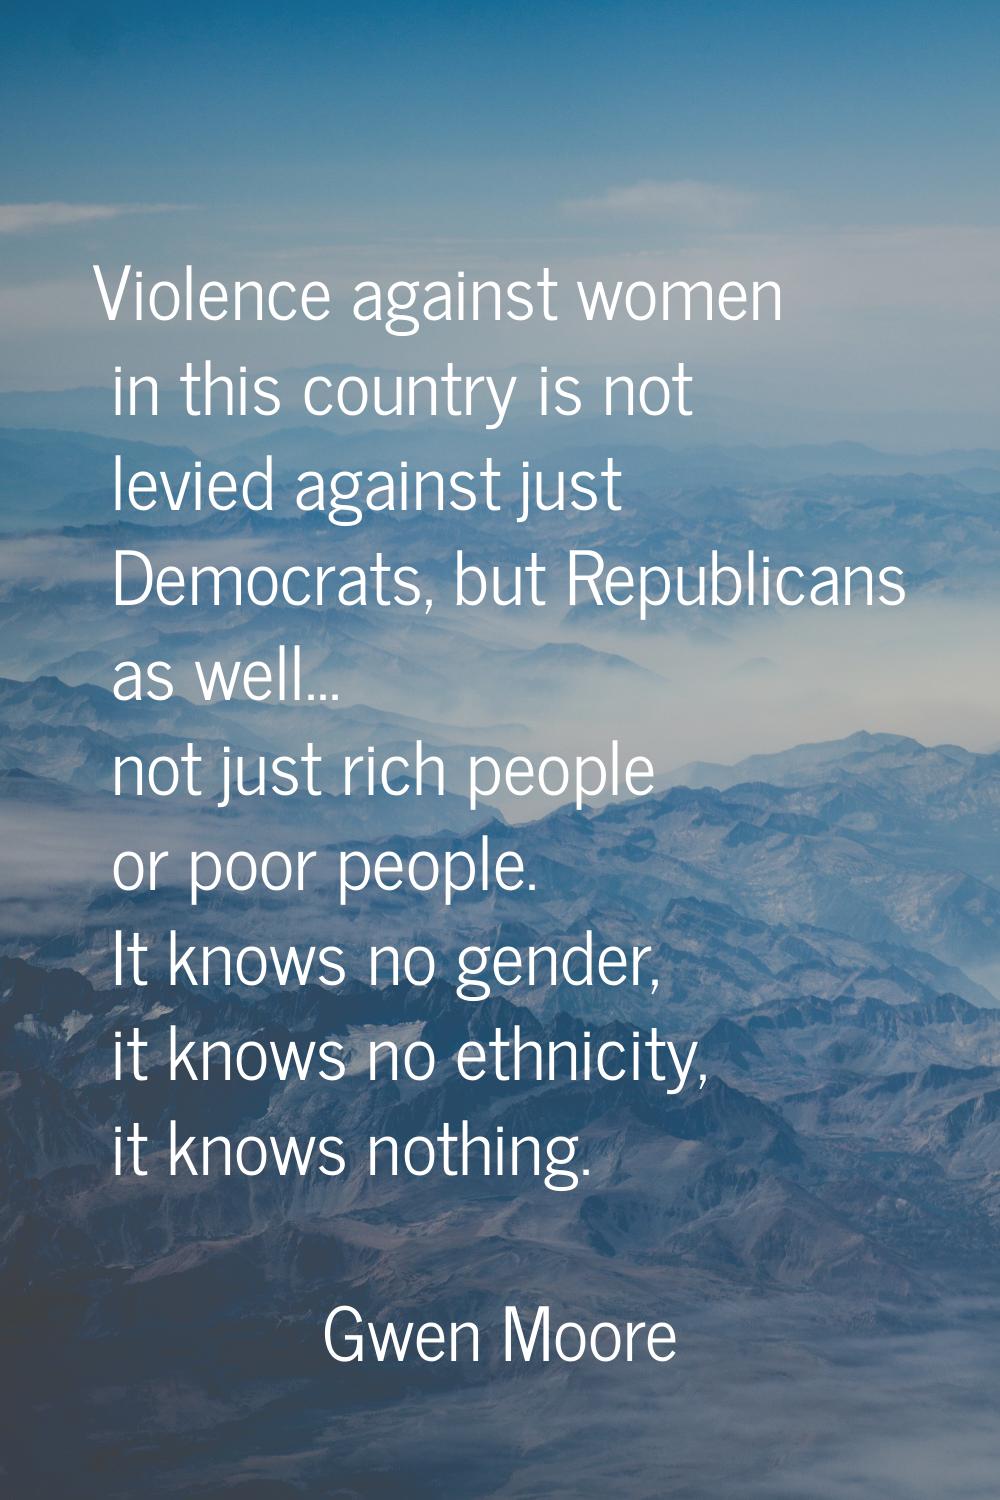 Violence against women in this country is not levied against just Democrats, but Republicans as wel